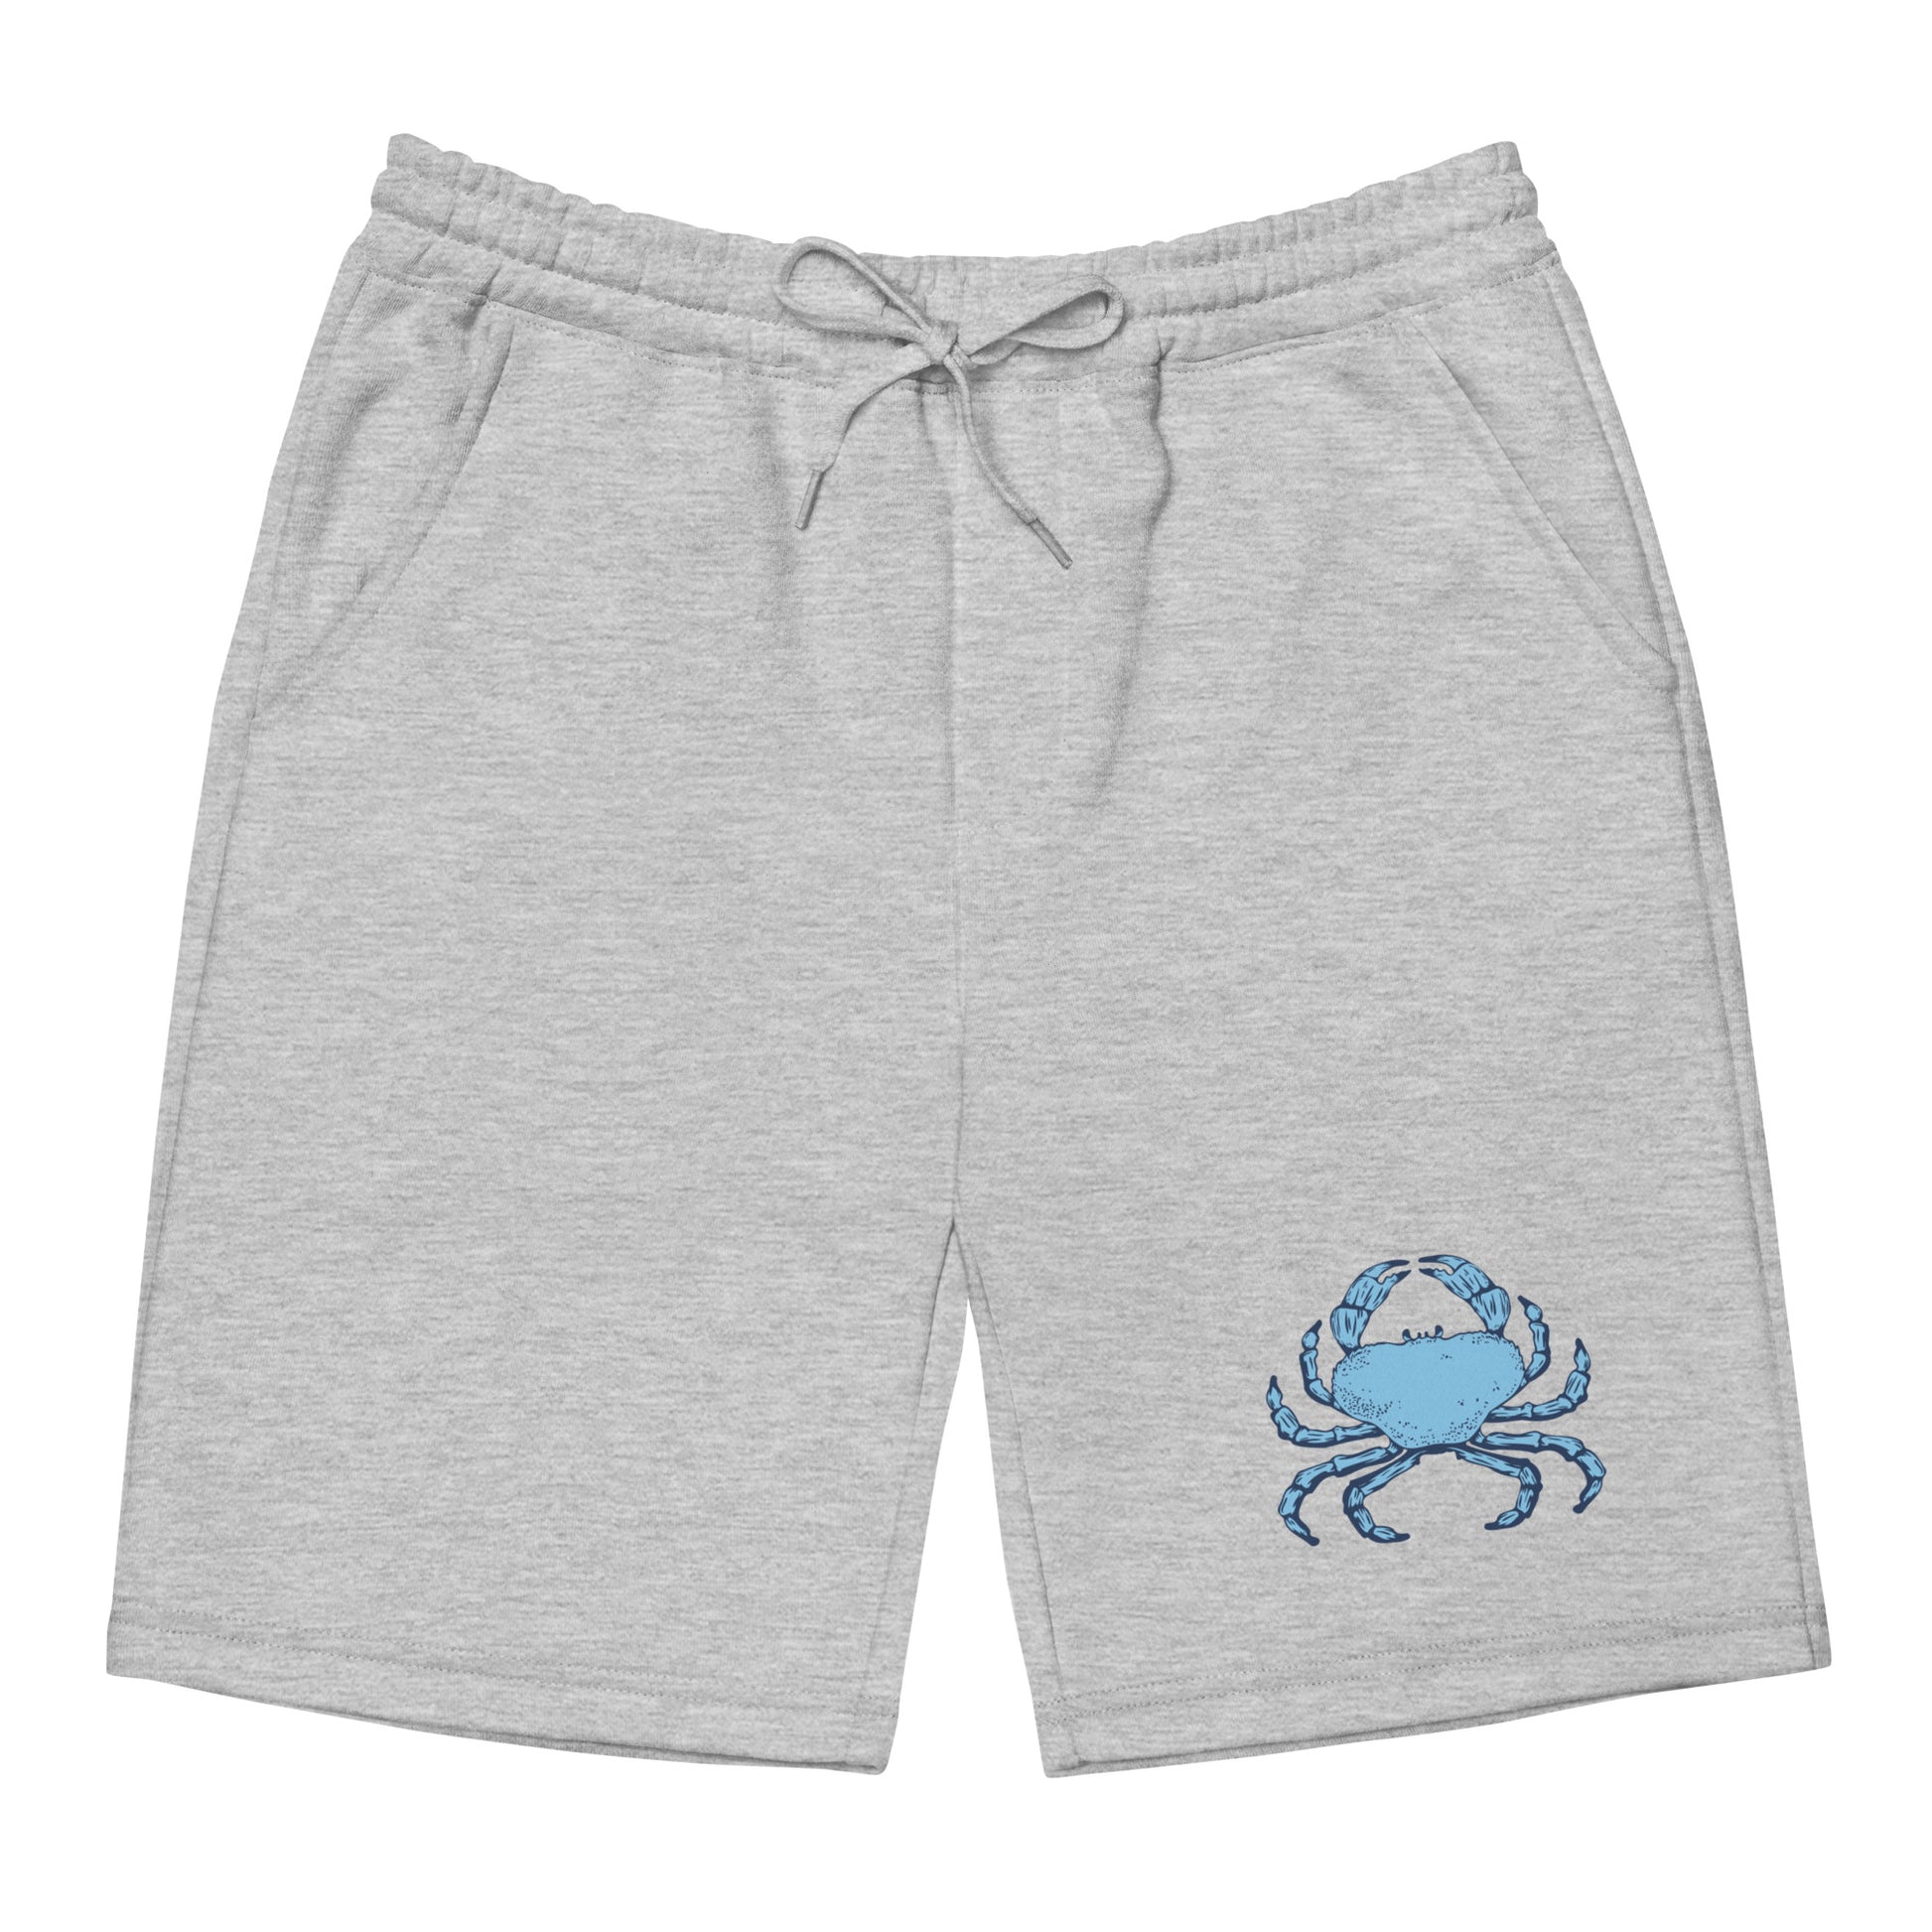 New England Seafood Company Men's fleece shorts - Tower Pizza Gift Shop